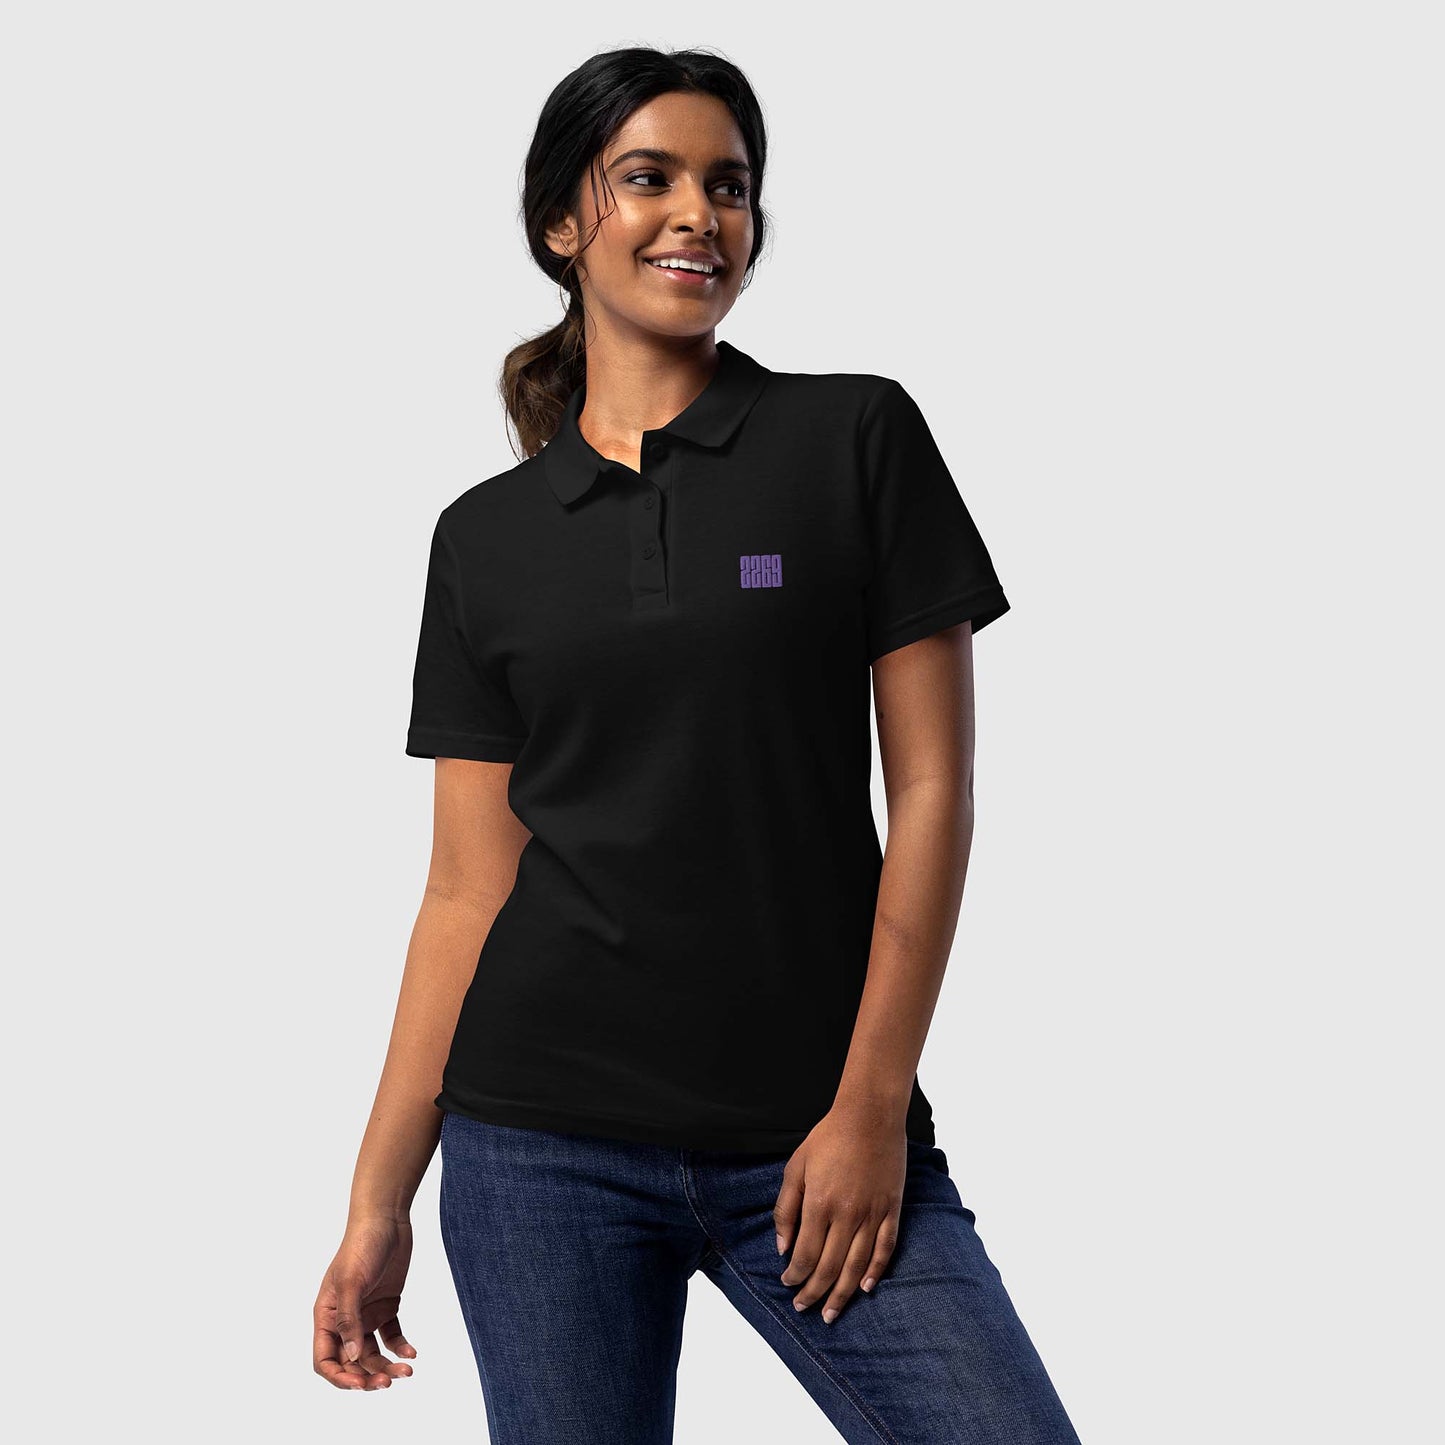 Women’s black pique polo shirt with embroidered 2269 logo